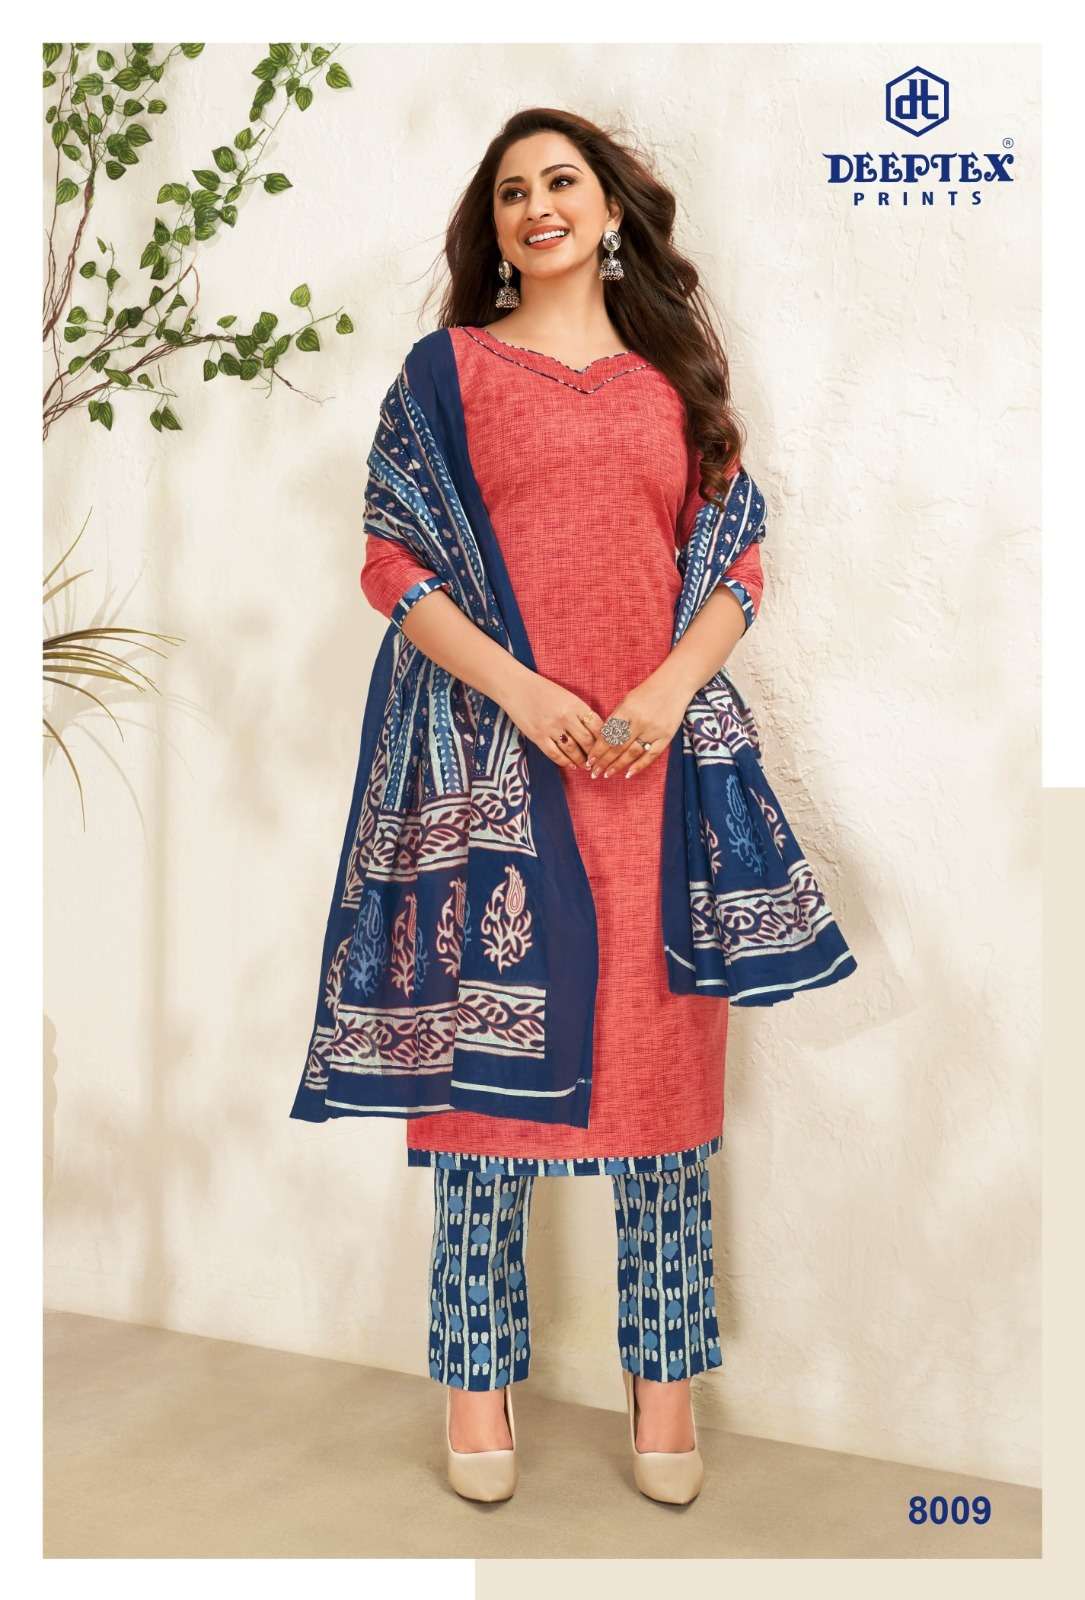 Miss India Vol-80 By Deeptex 8001 To 8026 Series Beautiful Stylish Suits Fancy Colorful Casual Wear & Ethnic Wear & Ready To Wear Pure Cotton Printed Dresses At Wholesale Price